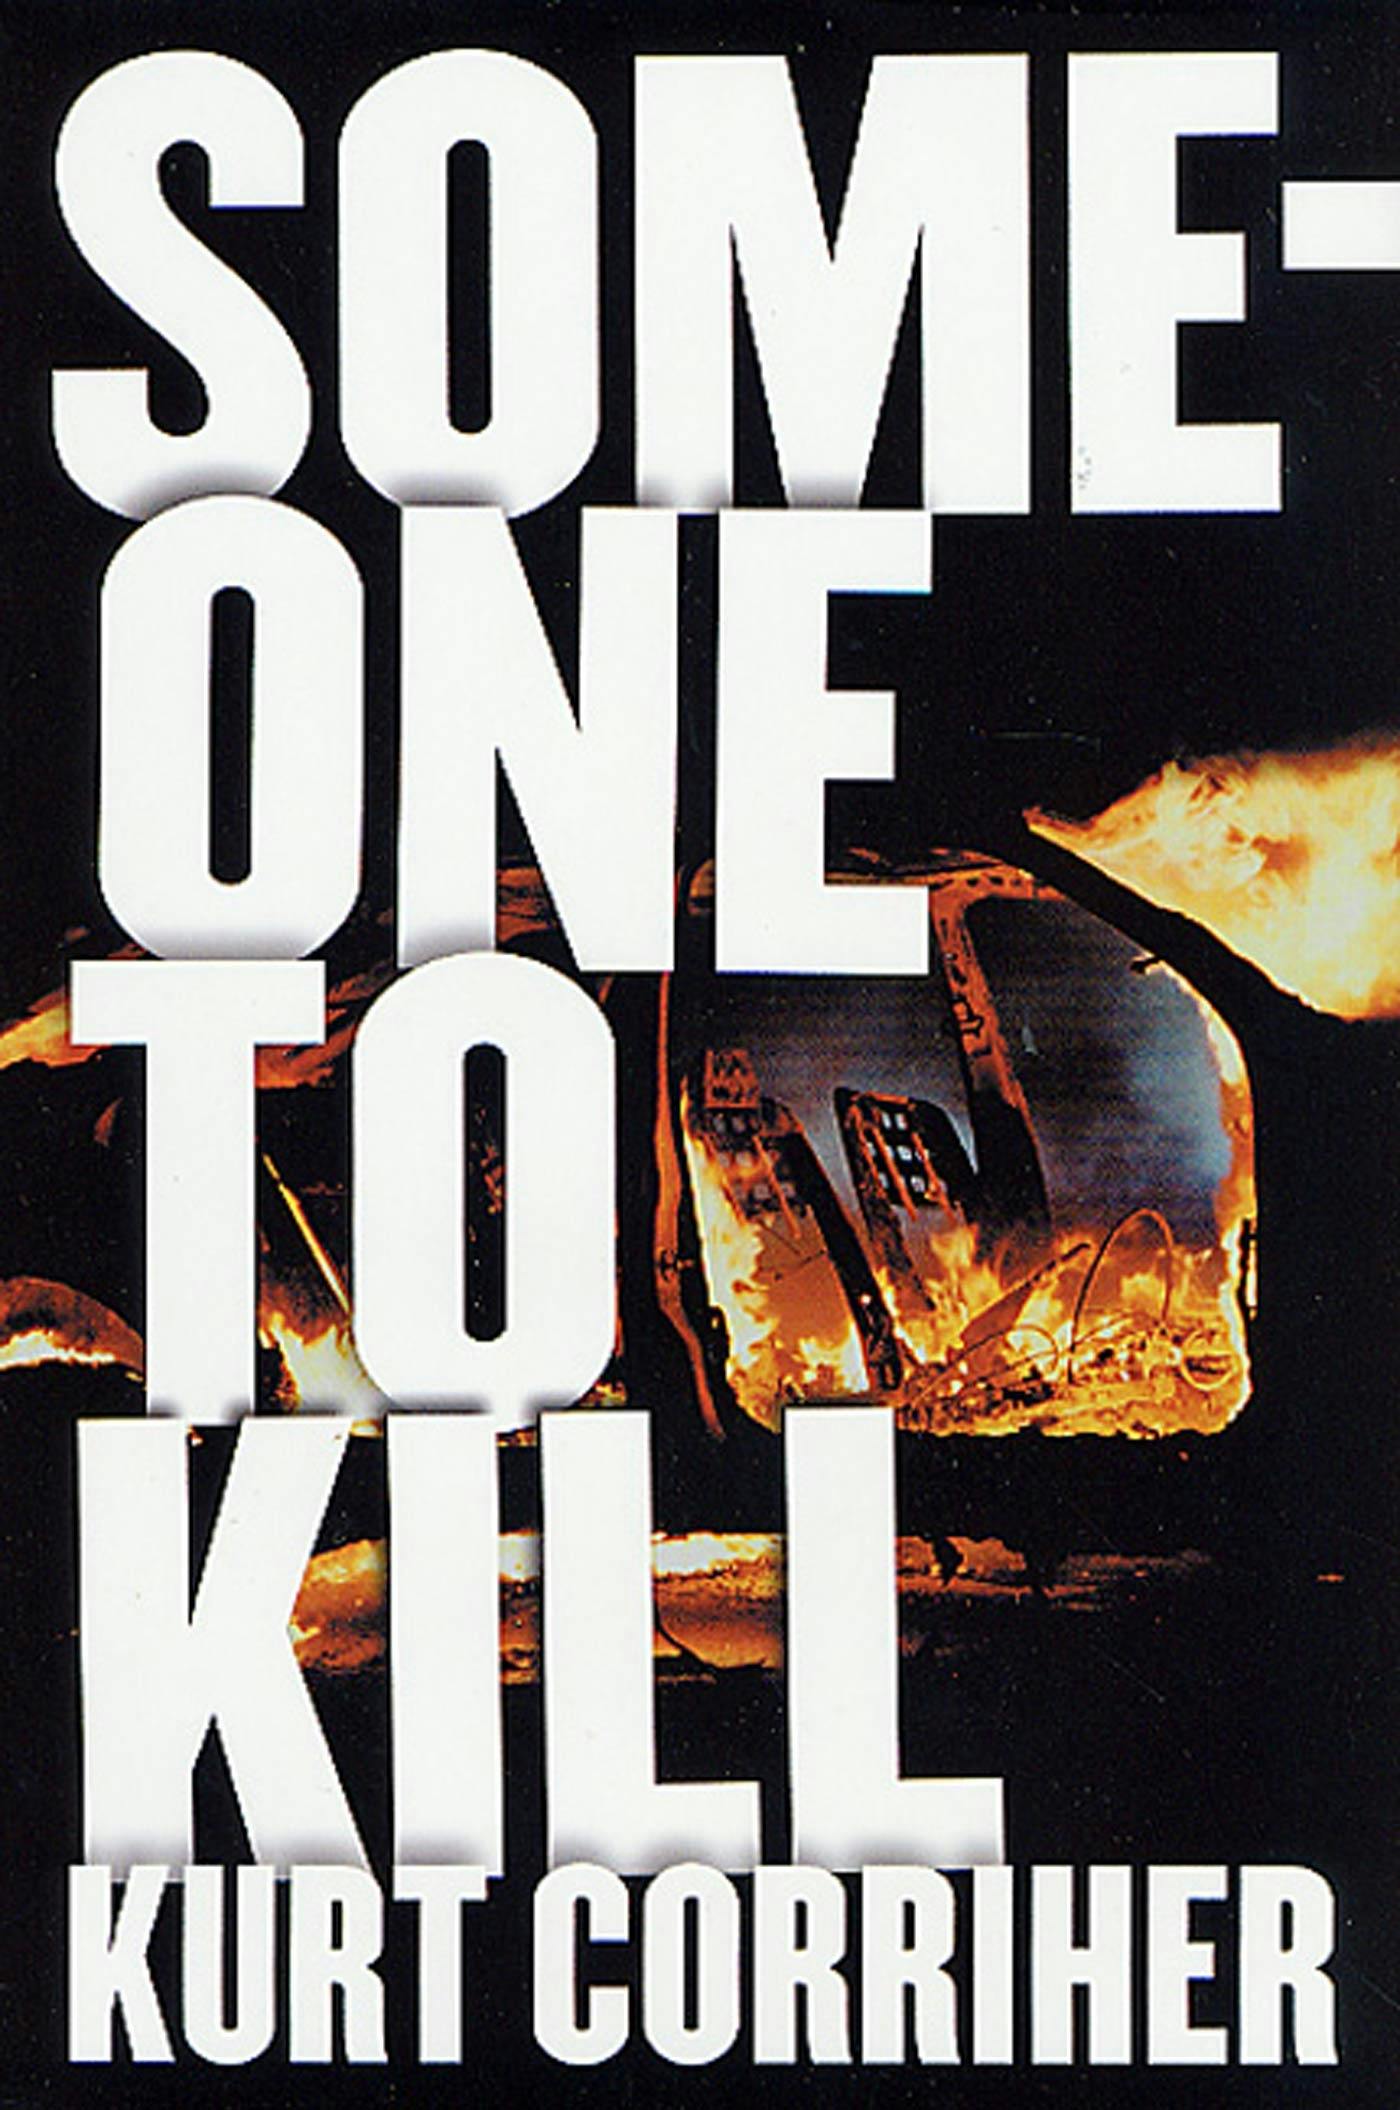 Cover for the book titled as: Someone To Kill